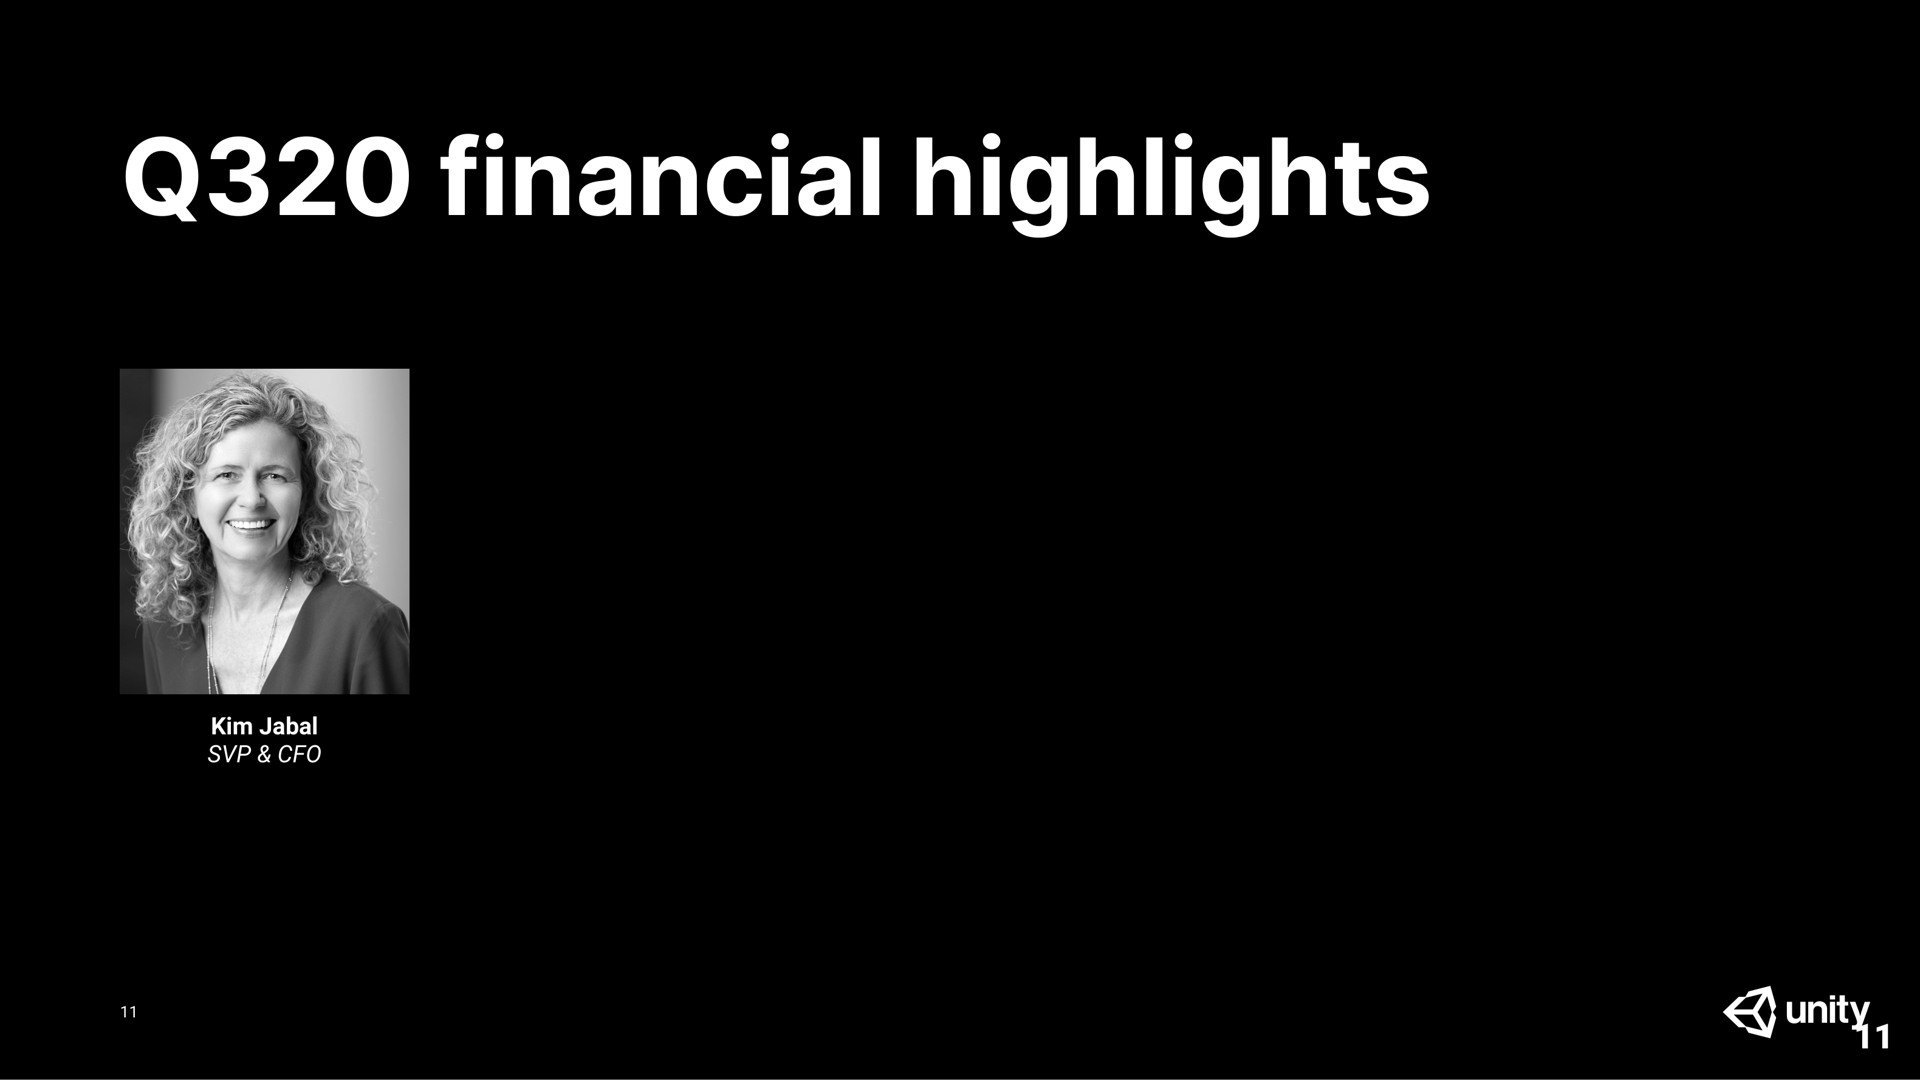 text financial highlights keep all text and images other than full slide backgrounds from the sides of the slide to avoid being cut off when printed | Unity Software